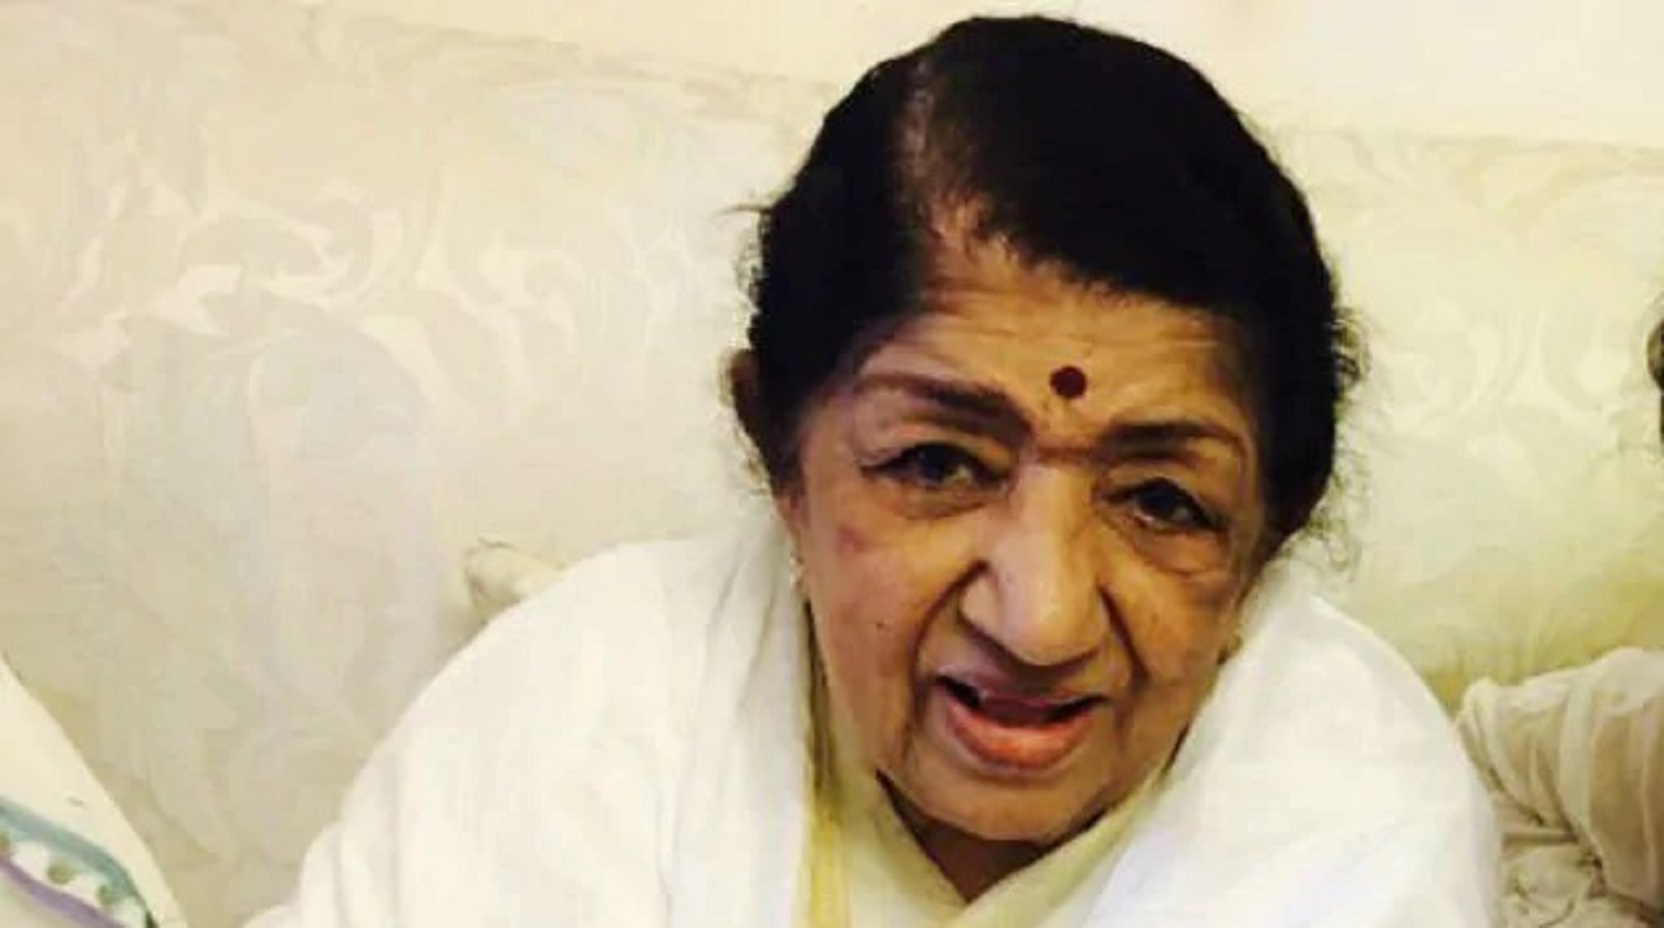 “We Are Trying Our Best” Say Doctors As Lata Mangeshkar Continues To Be In ICU